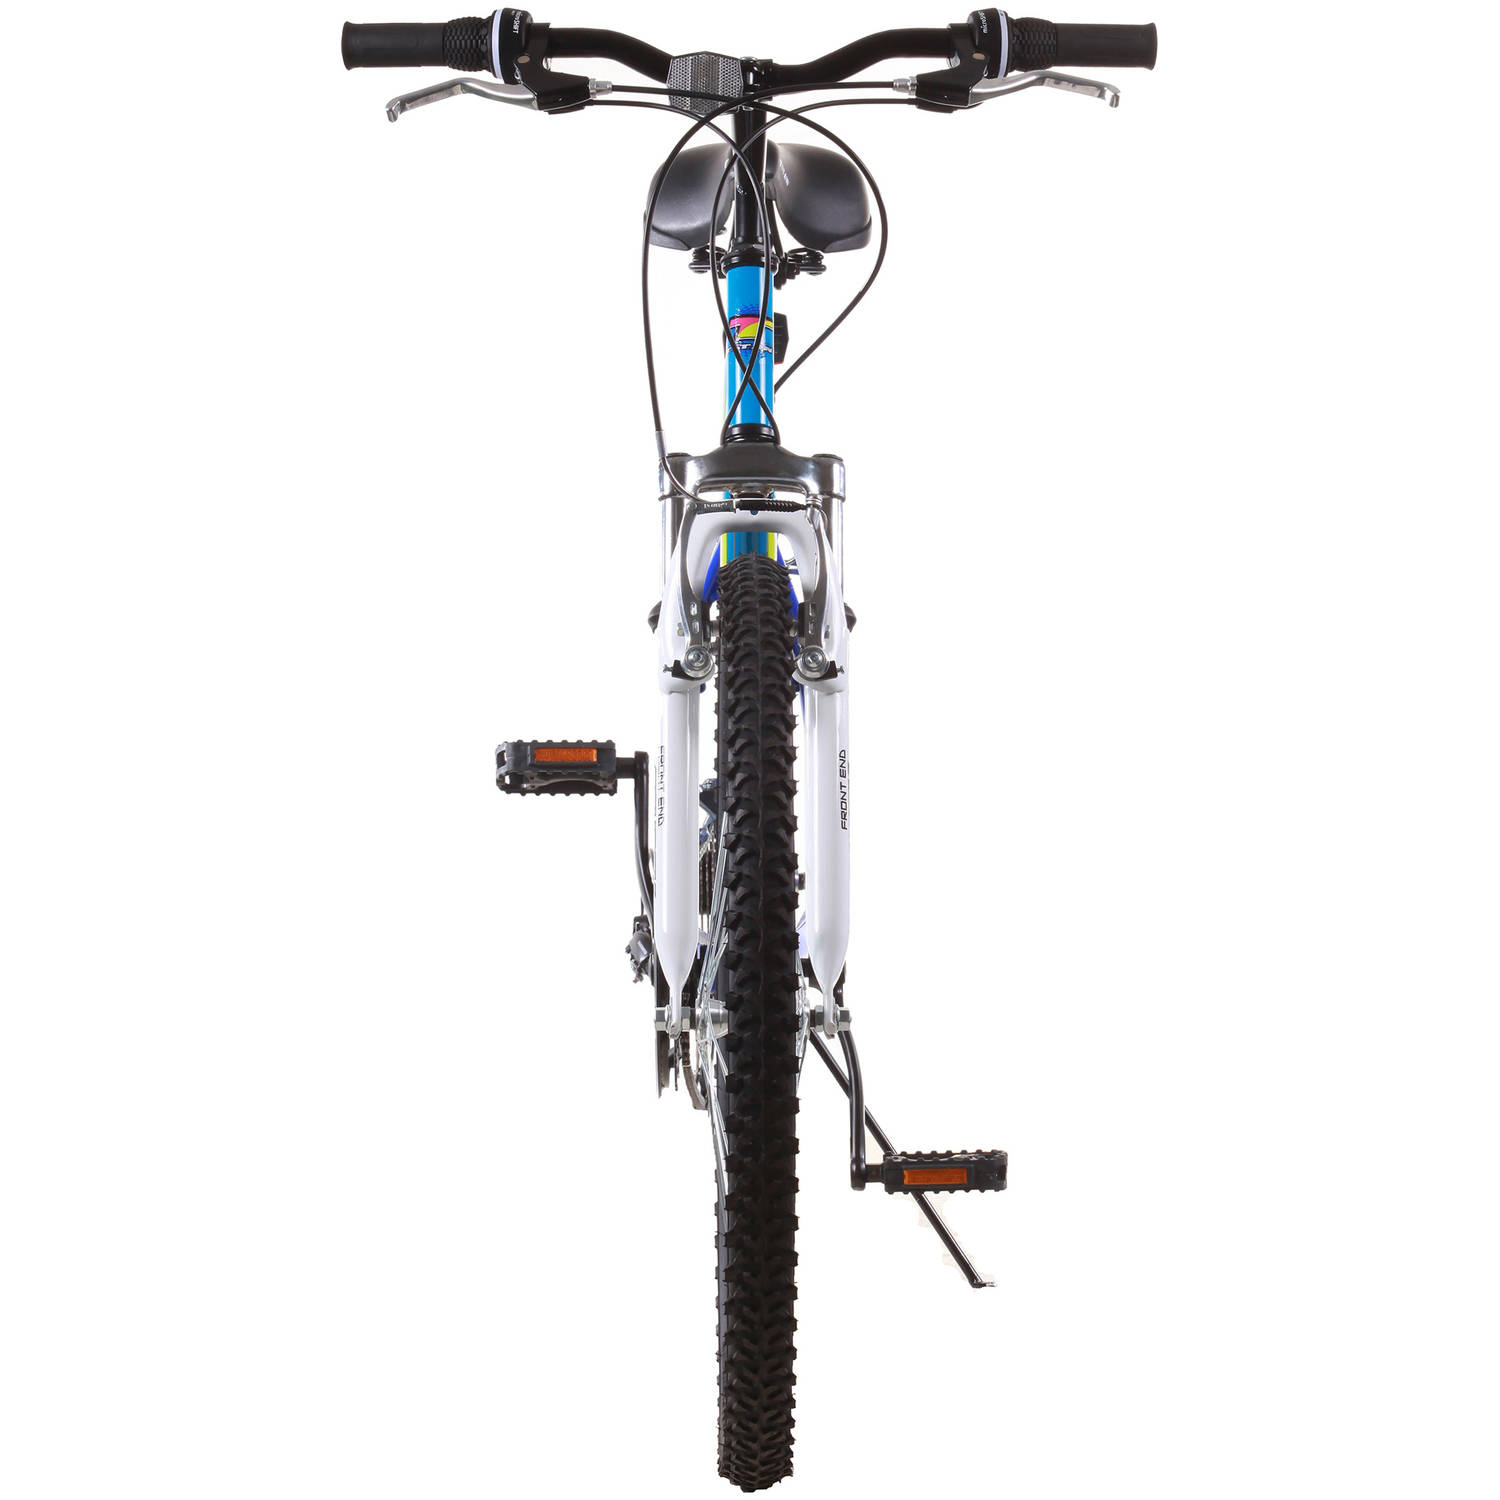 TITAN Trail 21-Speed Suspension Women's Mountain Bike with Front Shock, Blue - image 4 of 12